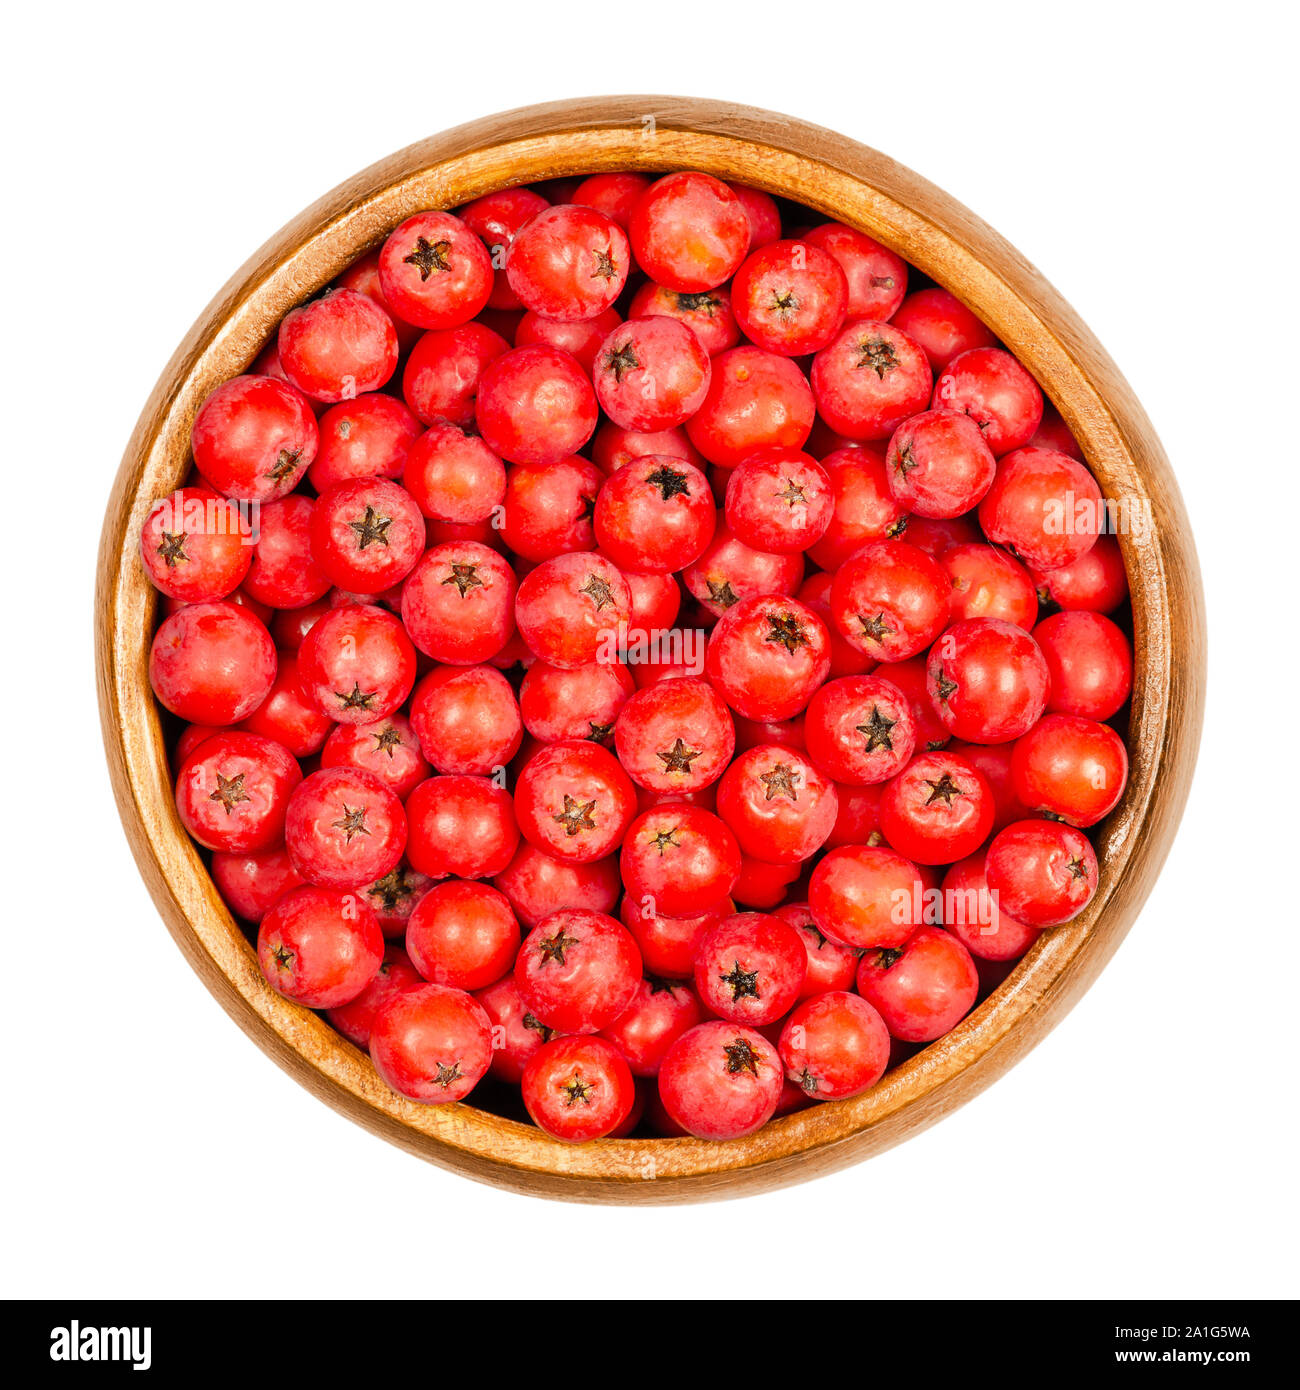 Firethorn fruits in wooden bowl. Fresh and ripe orange colored seeds of Pyracantha. The fruit can be made into jelly. Bird food. Closeup, from above. Stock Photo